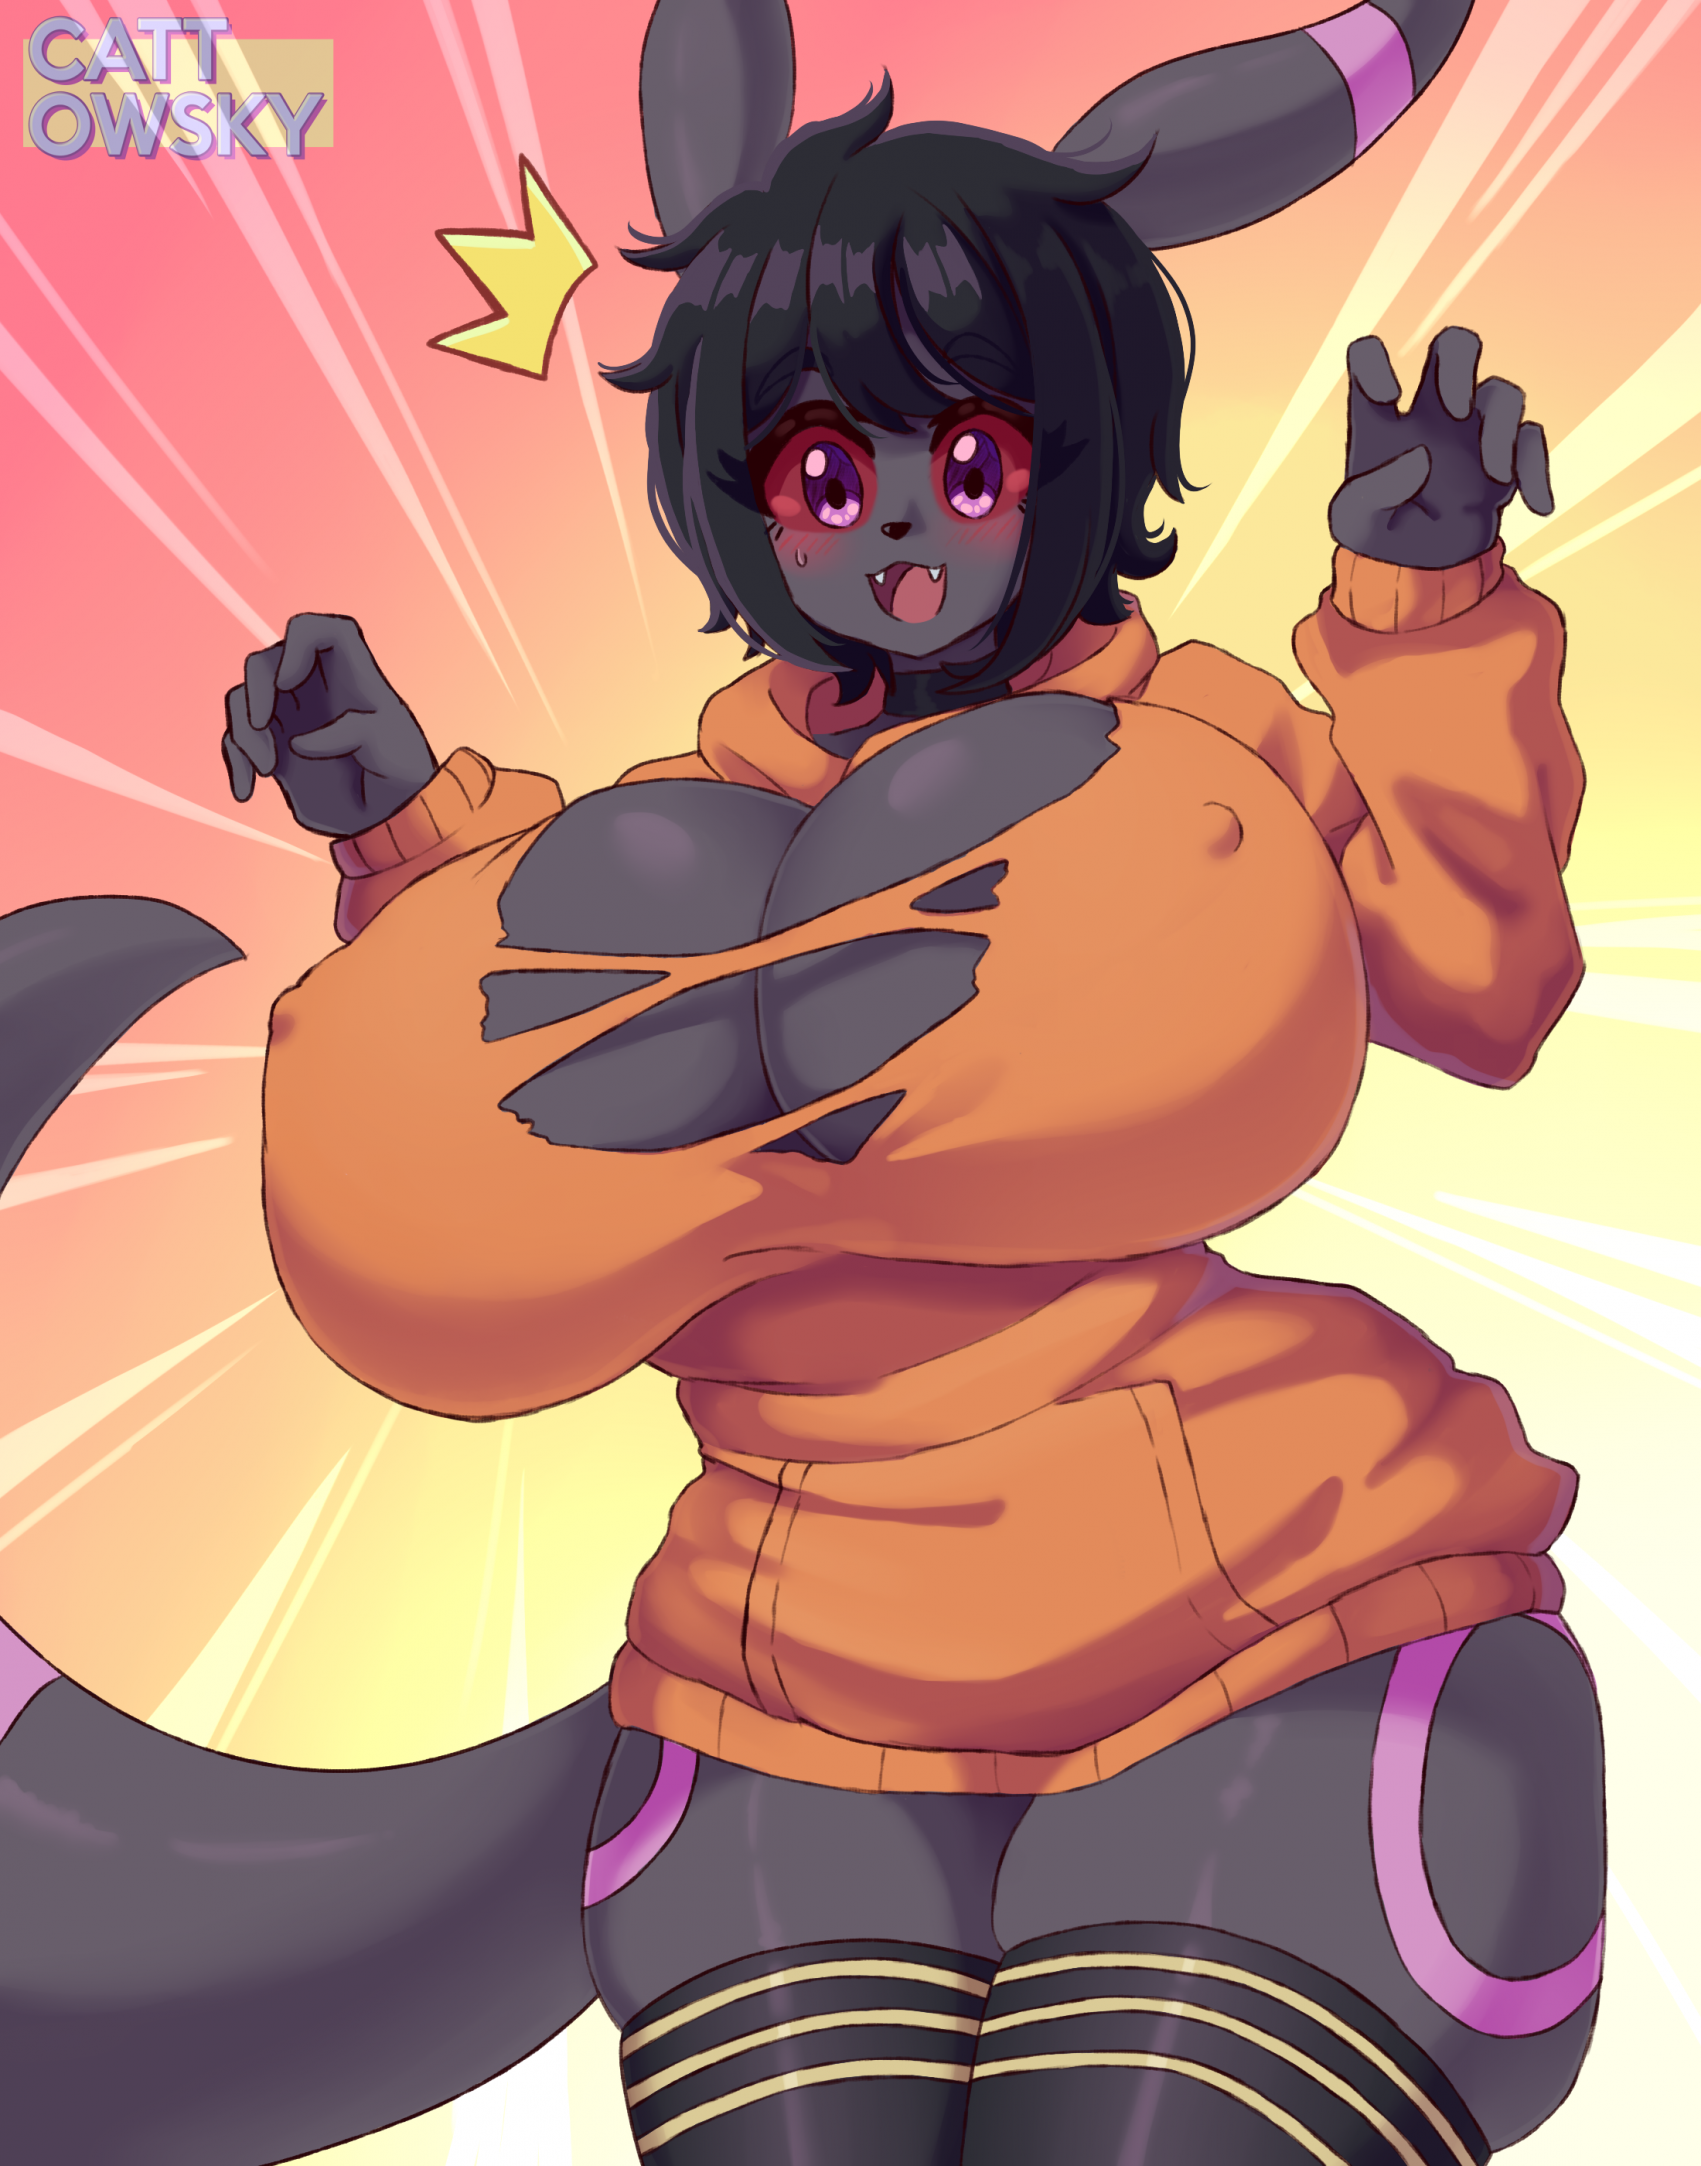 https://d.furaffinity.net/art/cattowsky/1698276809/1698276809.cattowsky_samara_very_large_breasts.png